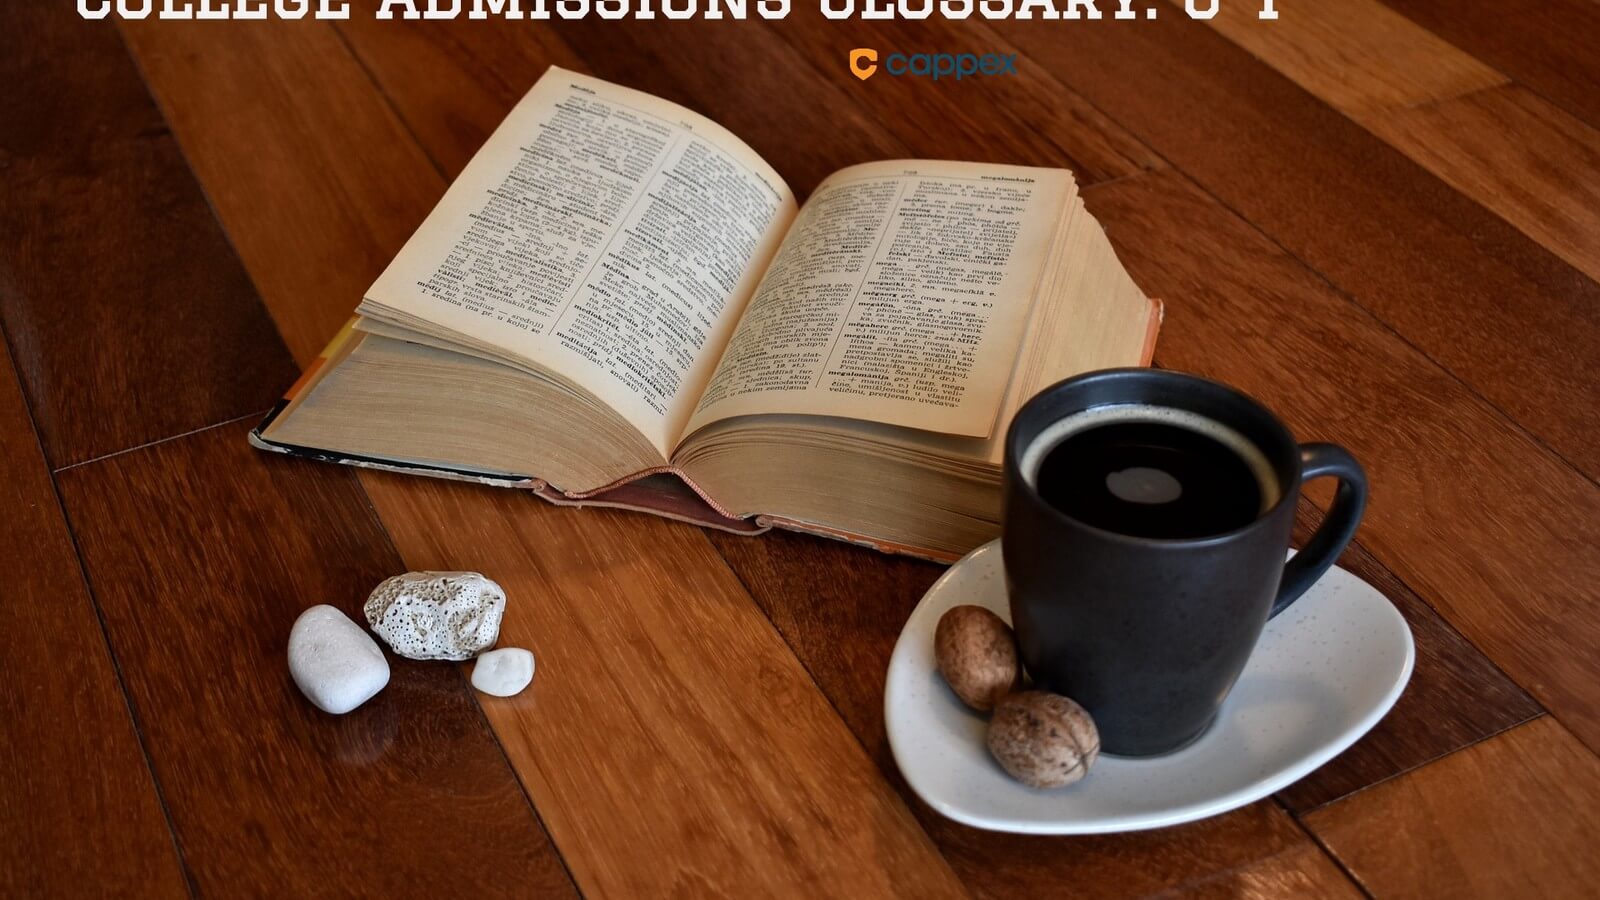 College Admissions Glossary: G-I